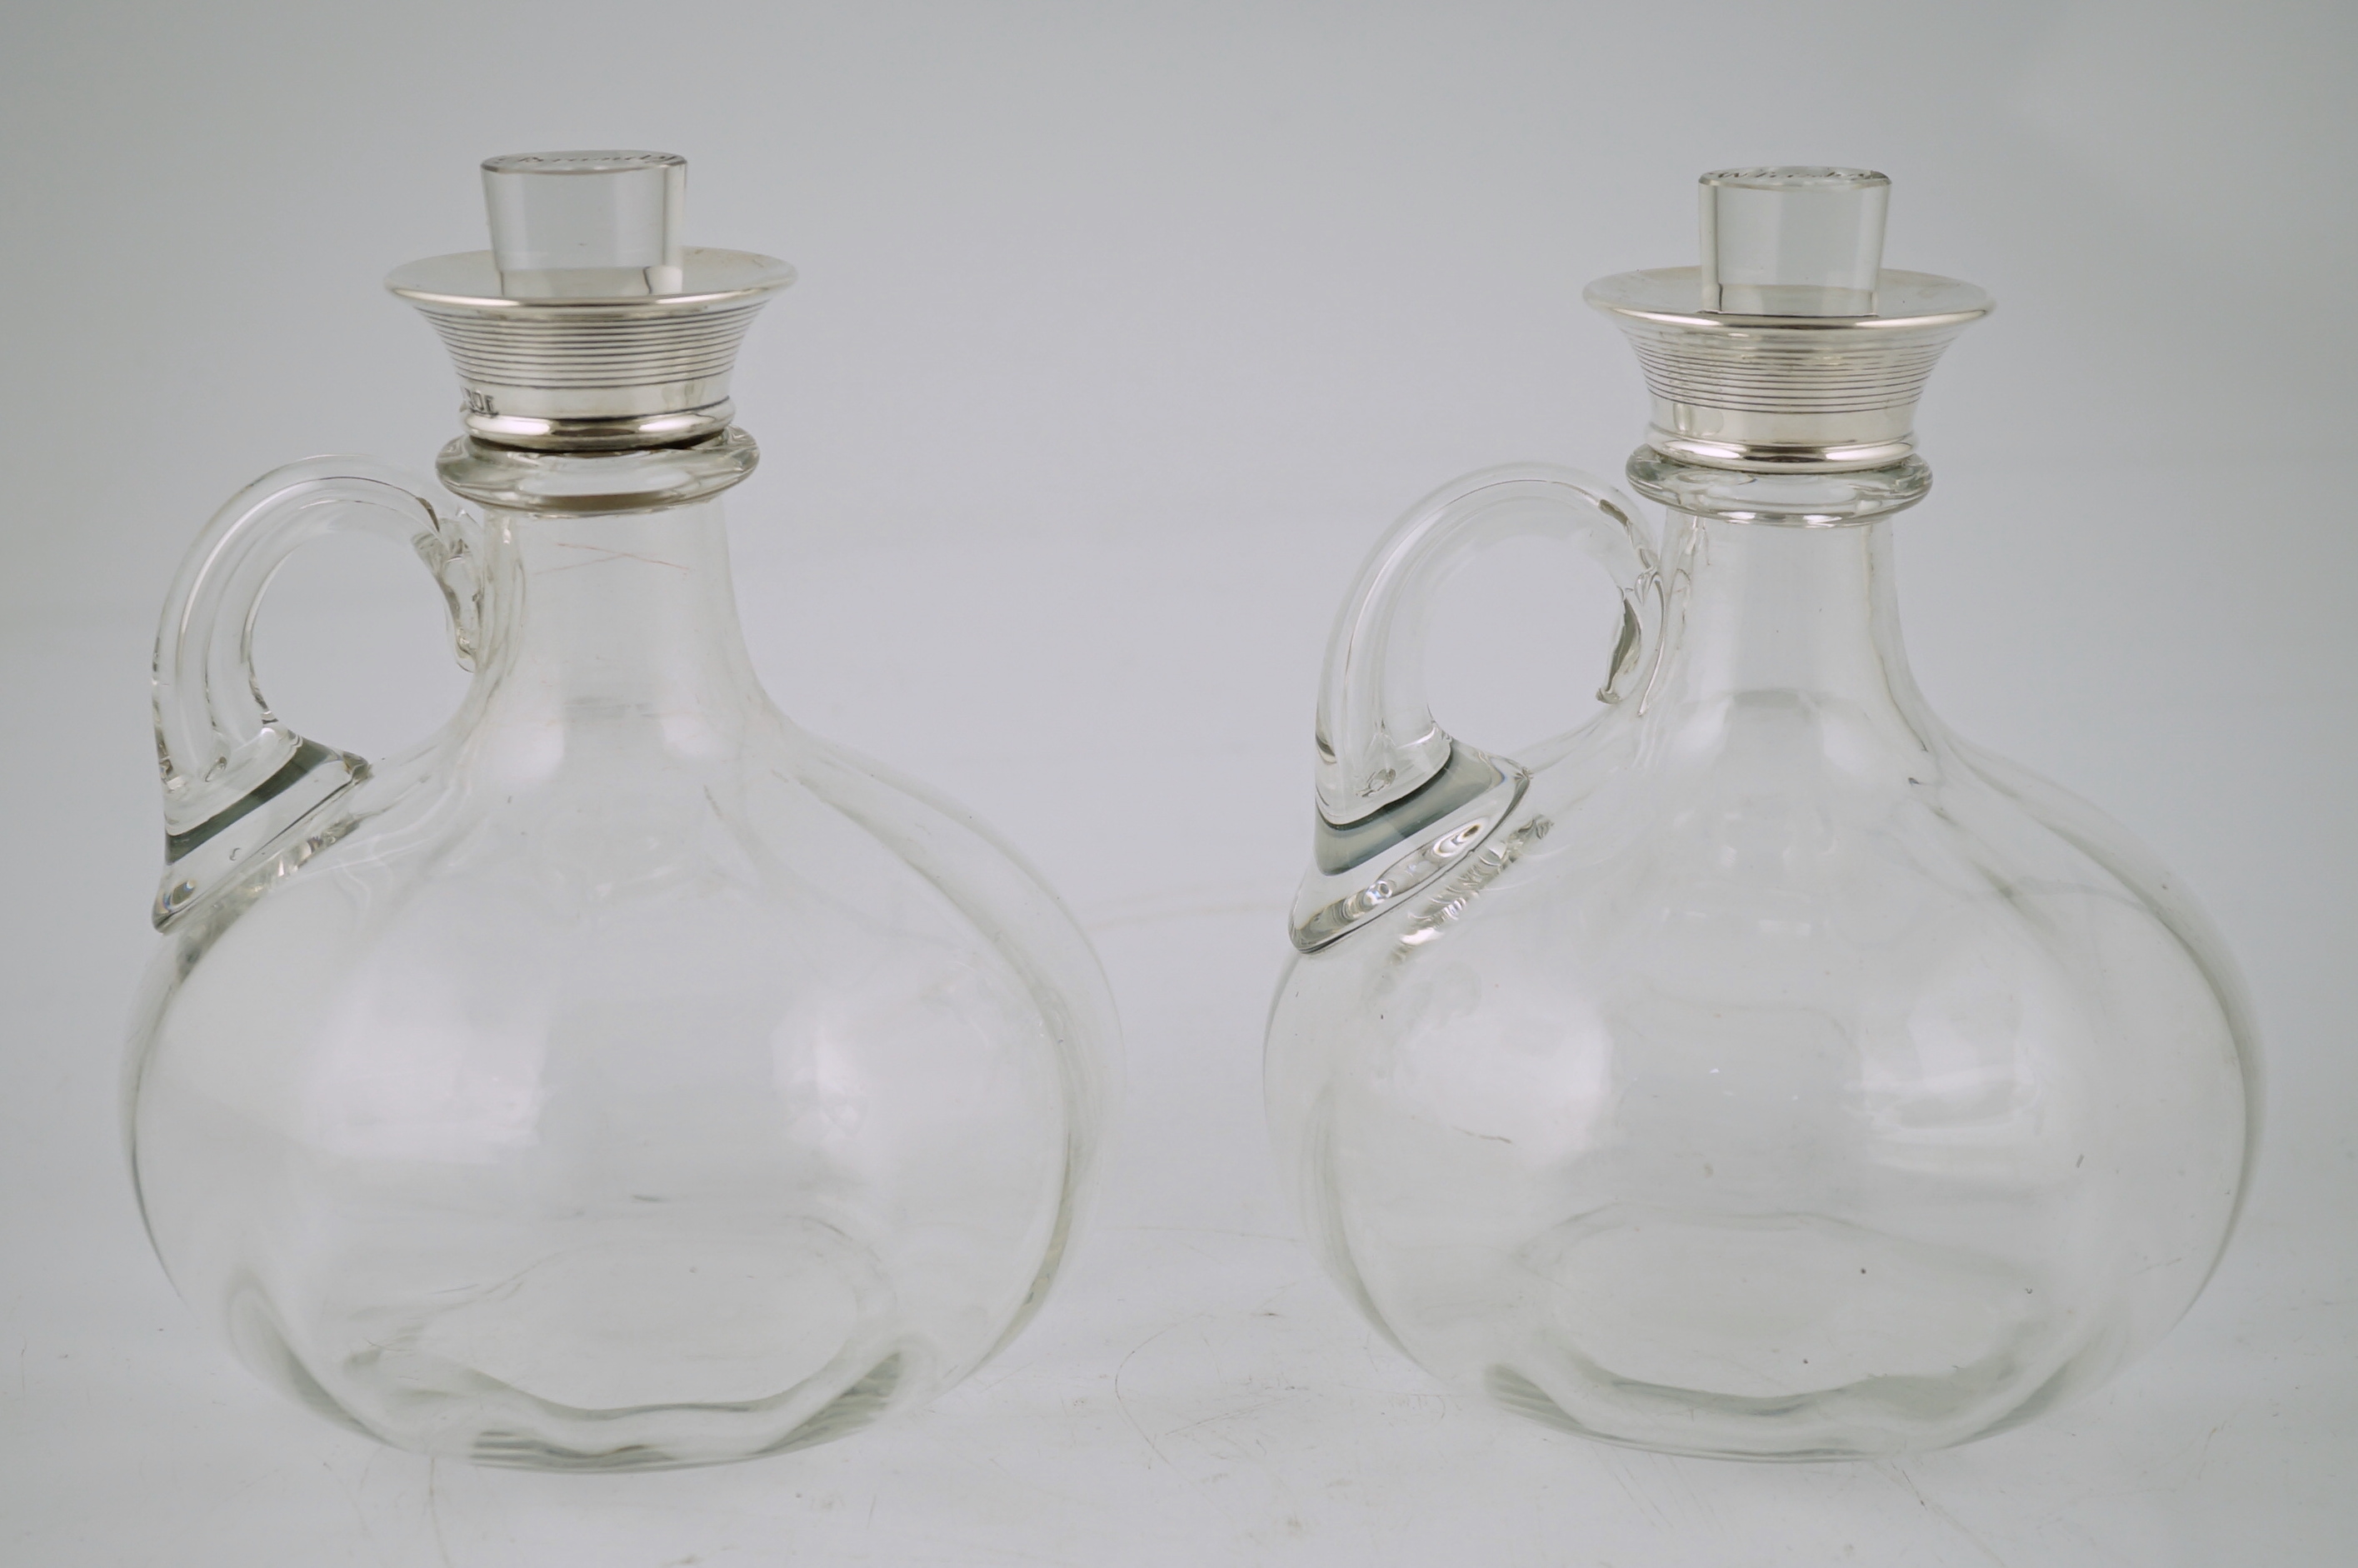 A pair of Edwardian silver mounted glass decanters, with stoppers etched 'Whisky' & 'Brandy', by Charles & George Asprey